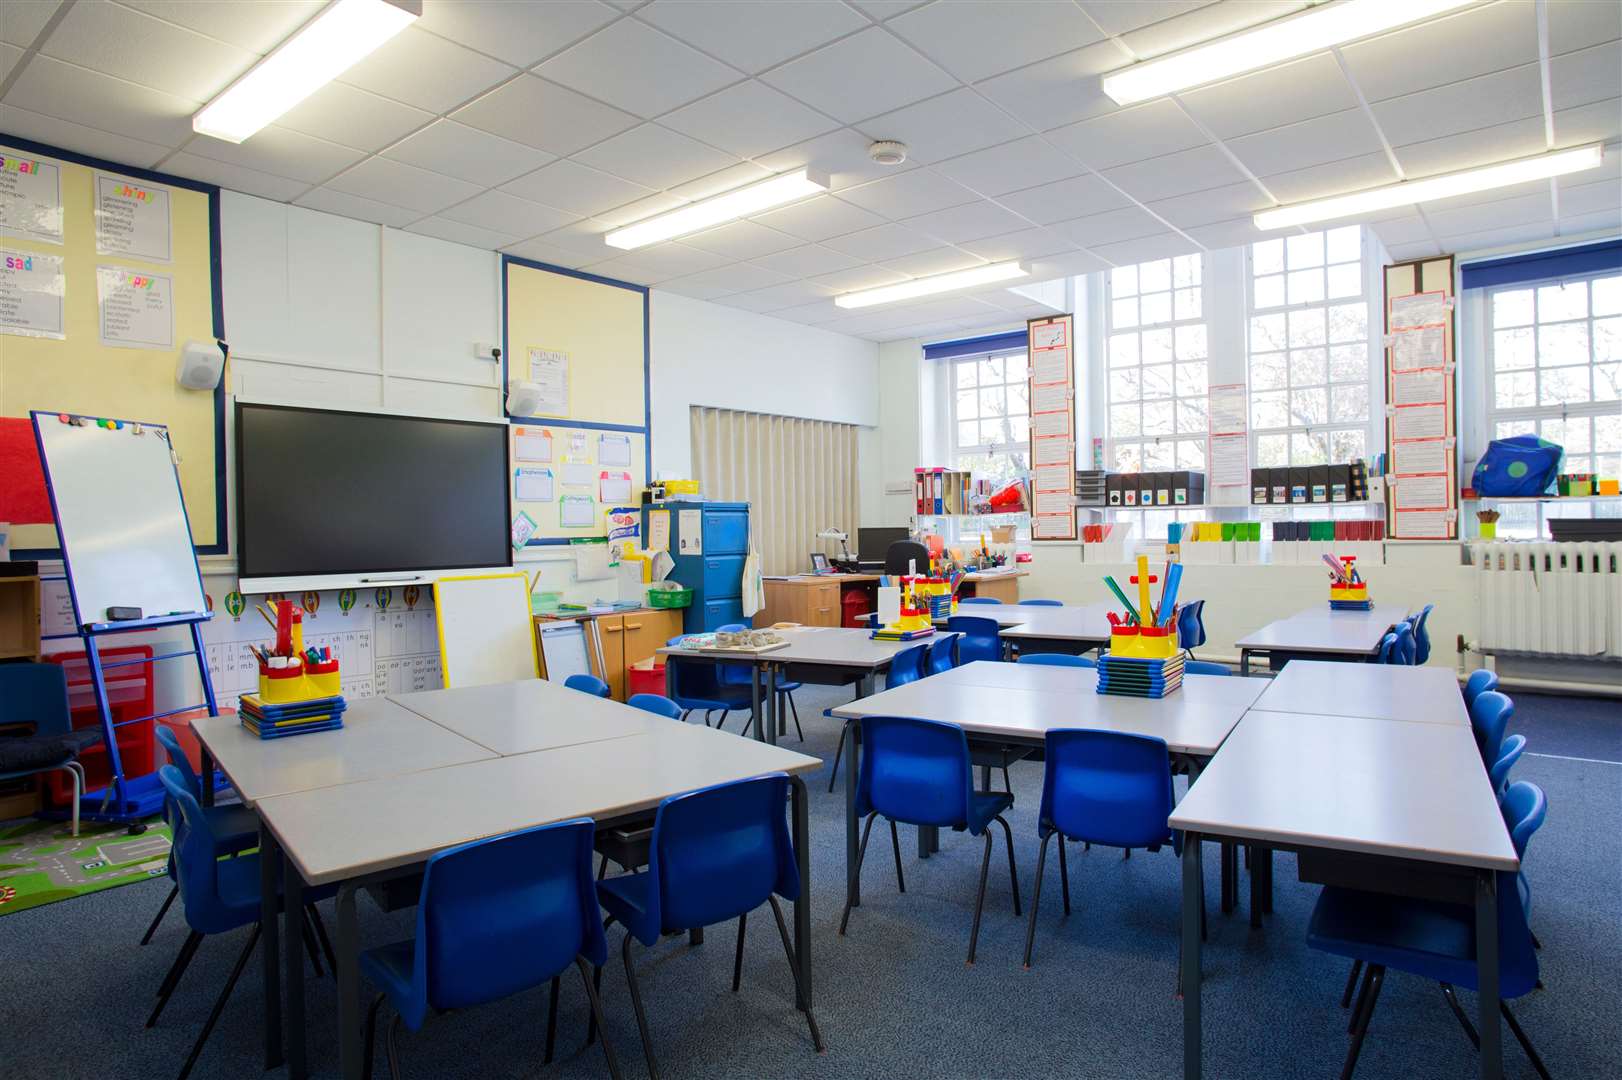 Two mothers have spoken out about their concerns over a teacher's treatment of pupils at a Sutherland primary school.